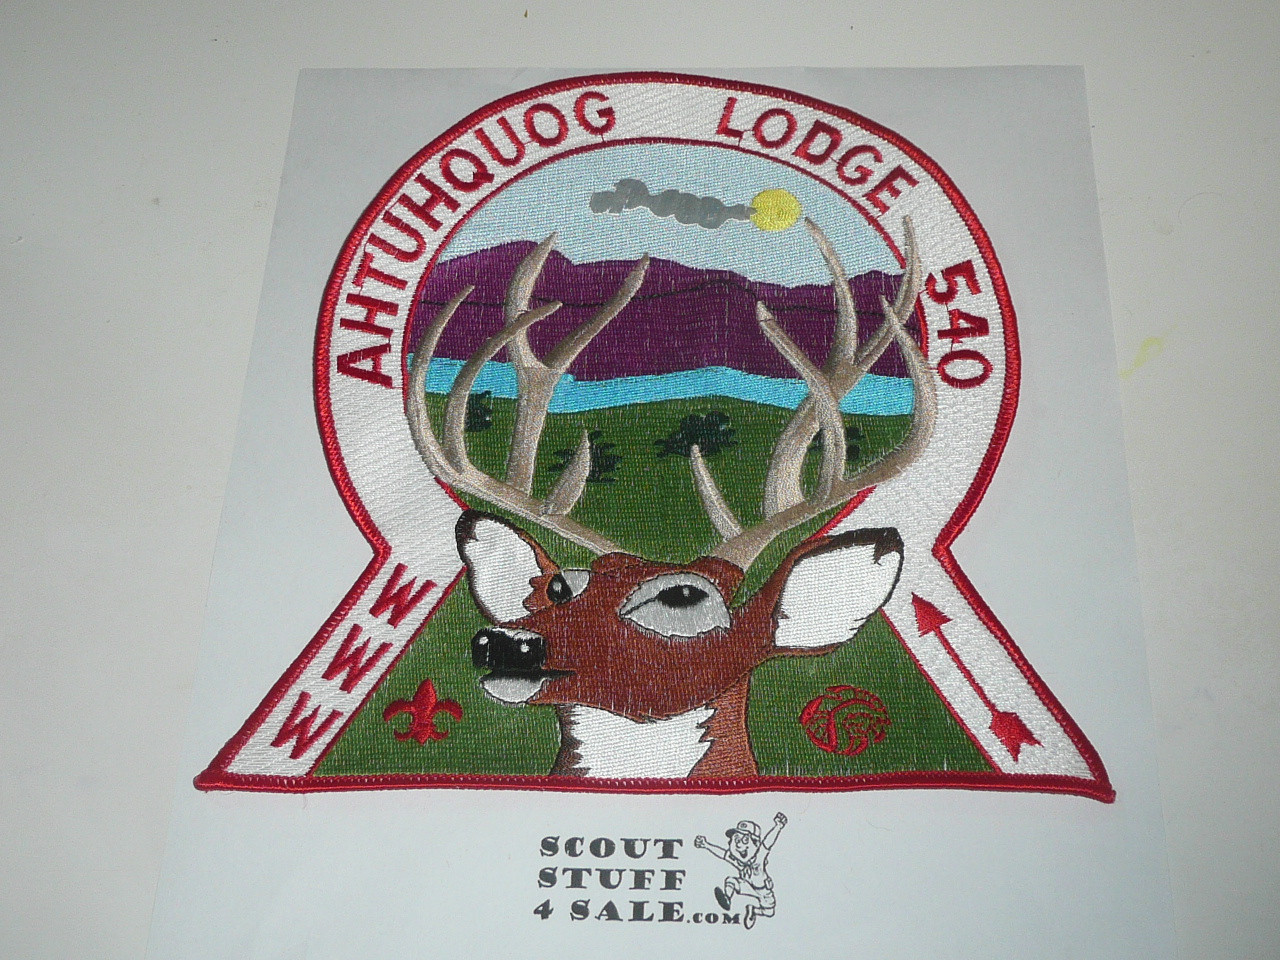 Order of the Arrow Lodge #540 Ahtuhquog j3 Jacket Patch